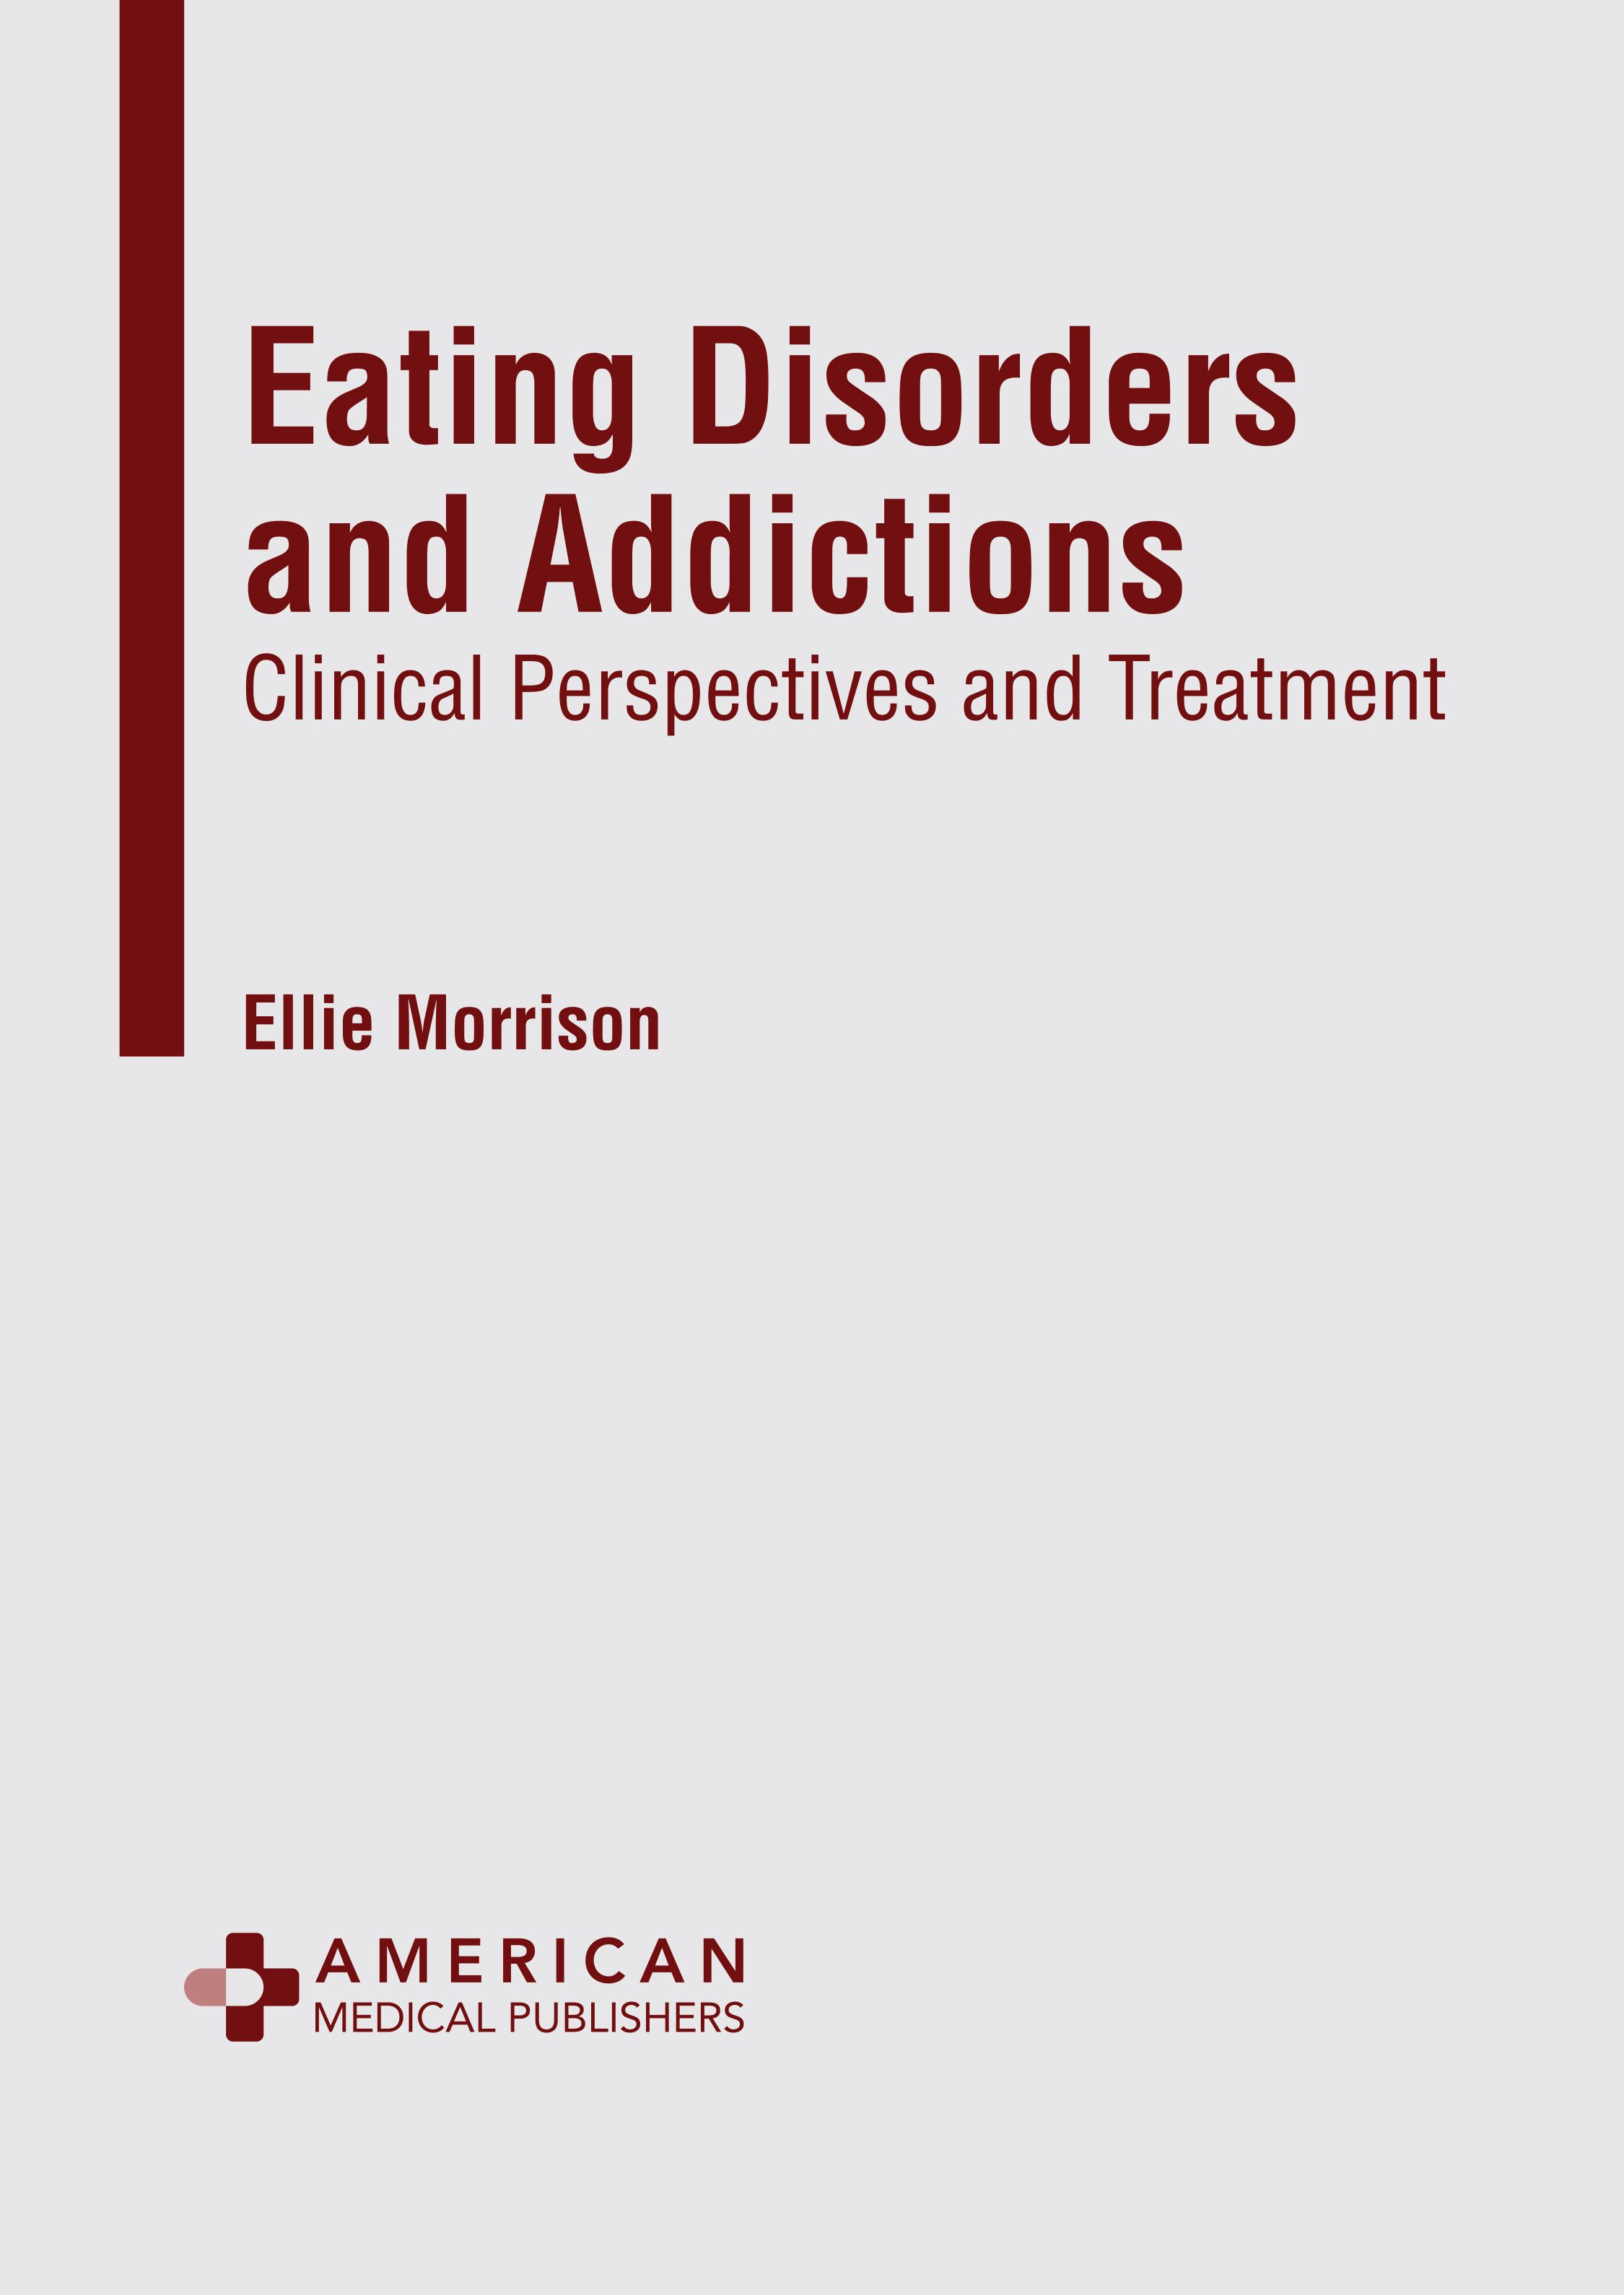 

exclusive-publishers/american-medical-publishers/eating-disorders-and-addictions-clinical-perspectives-and-treatment-9798887400822